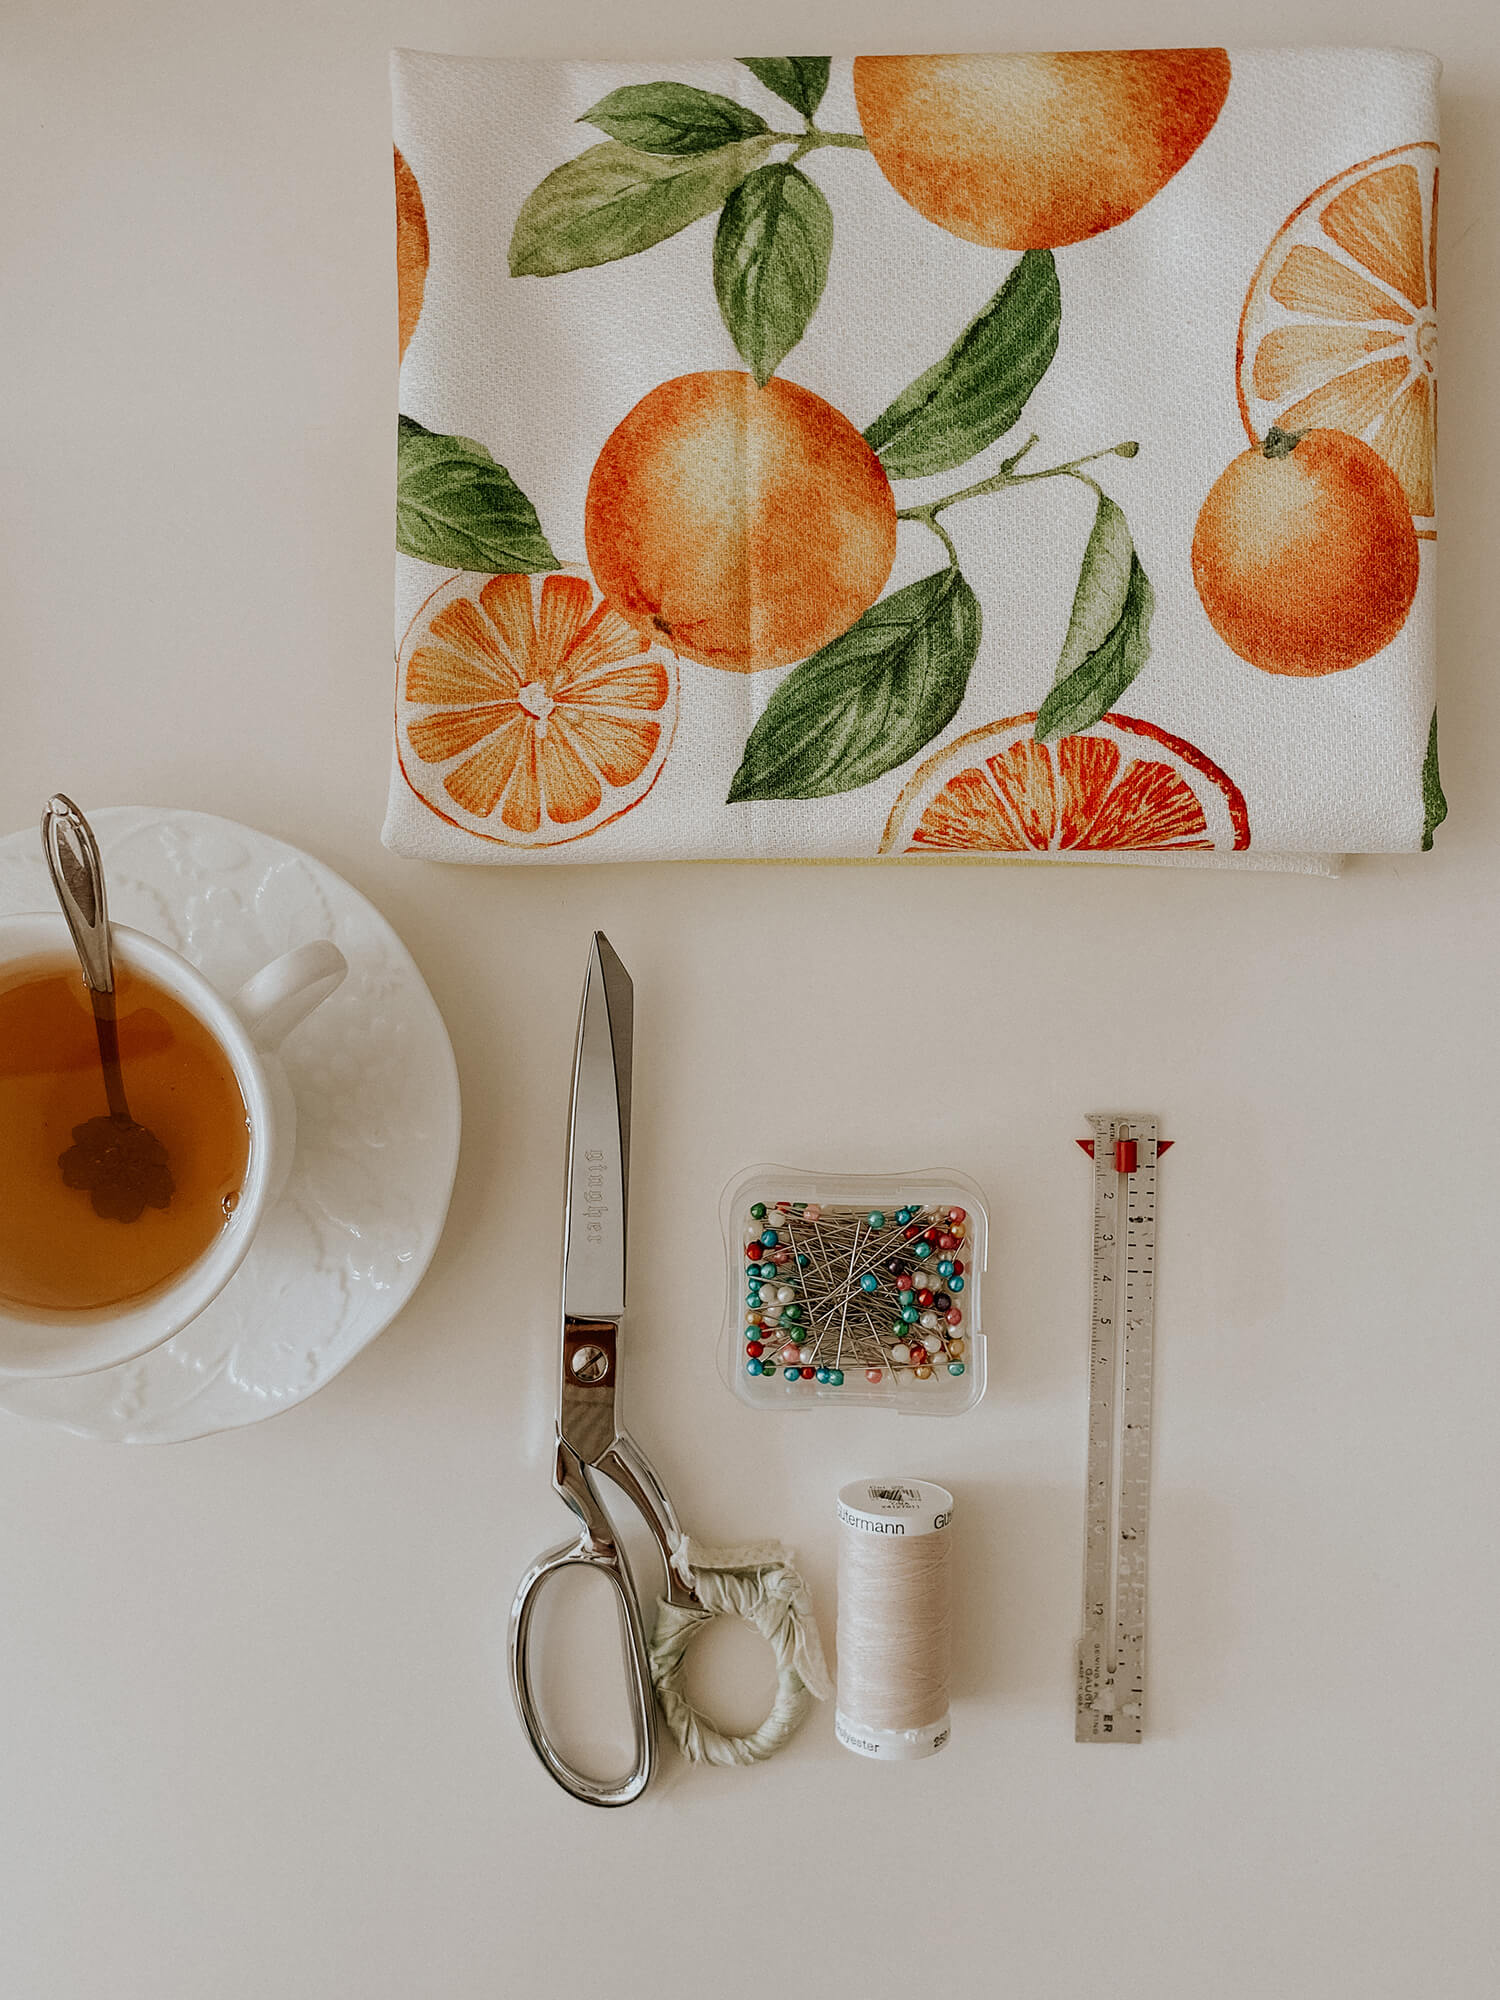 A Super Easy Pattern Weights Tutorial - Tea and a Sewing Machine